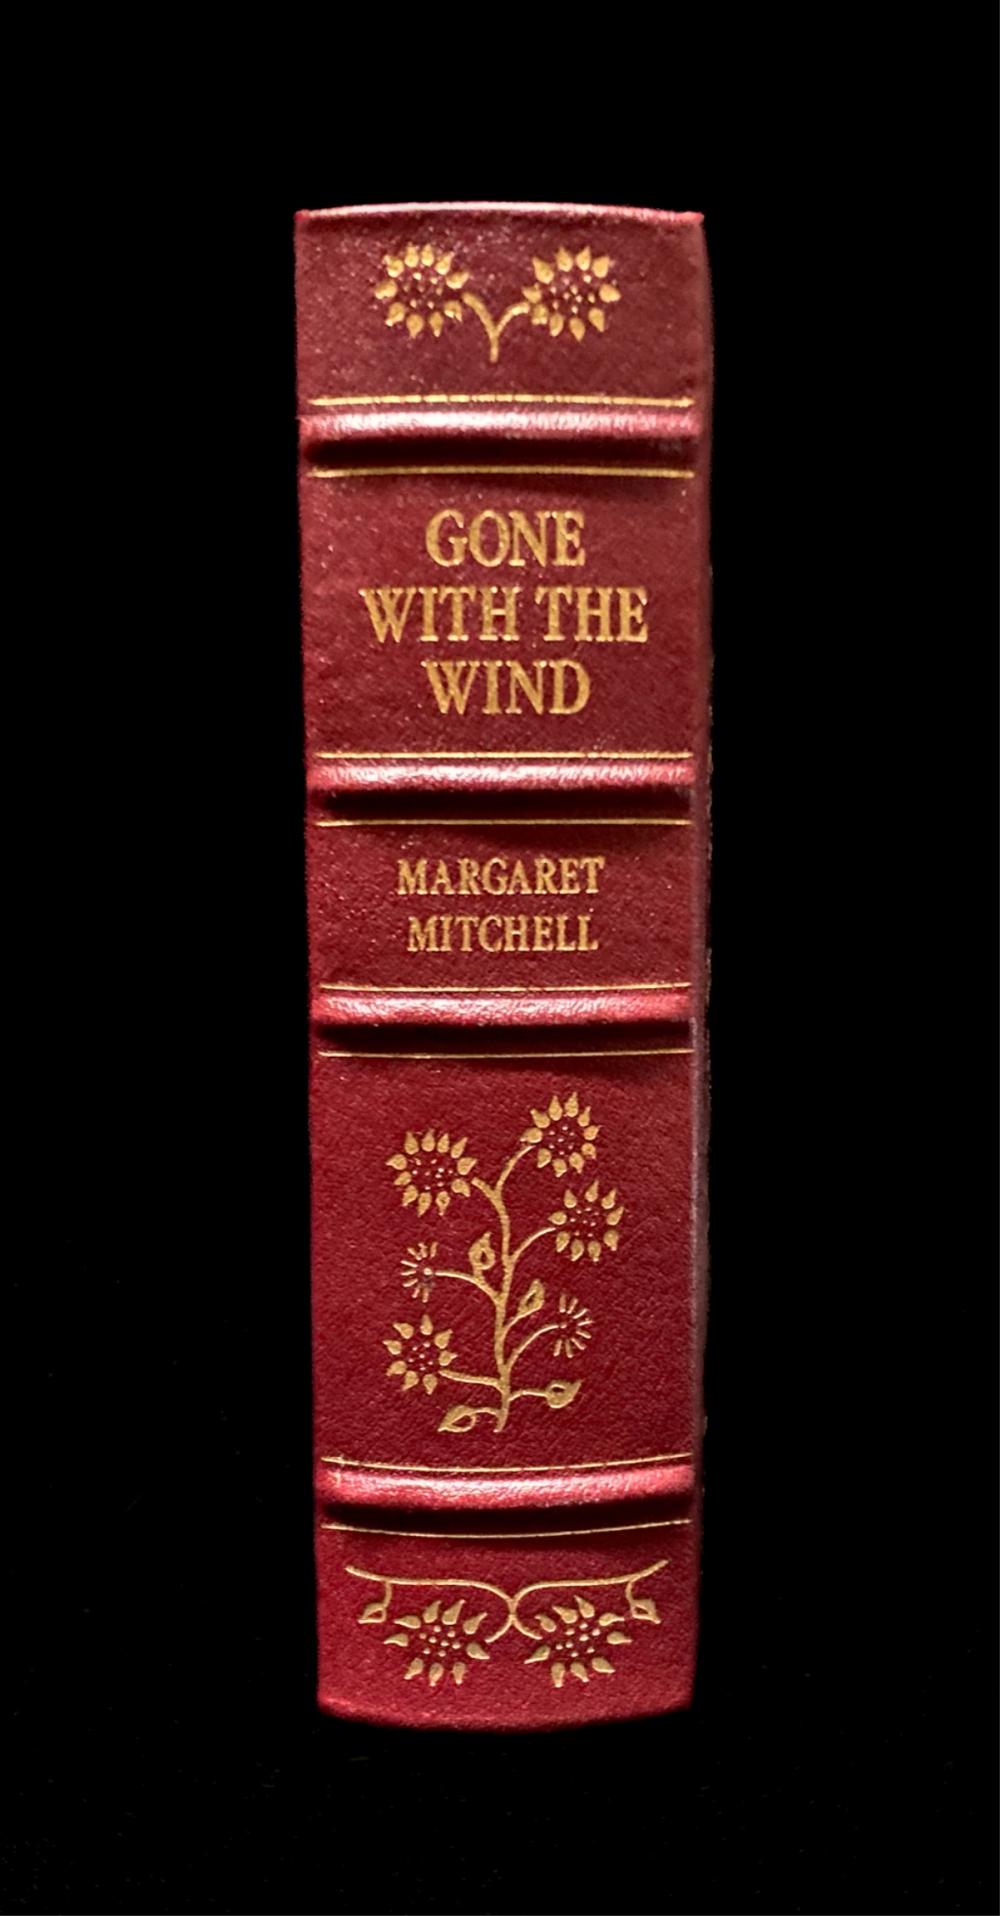 GONE WITH THE WIND BY MARGARET